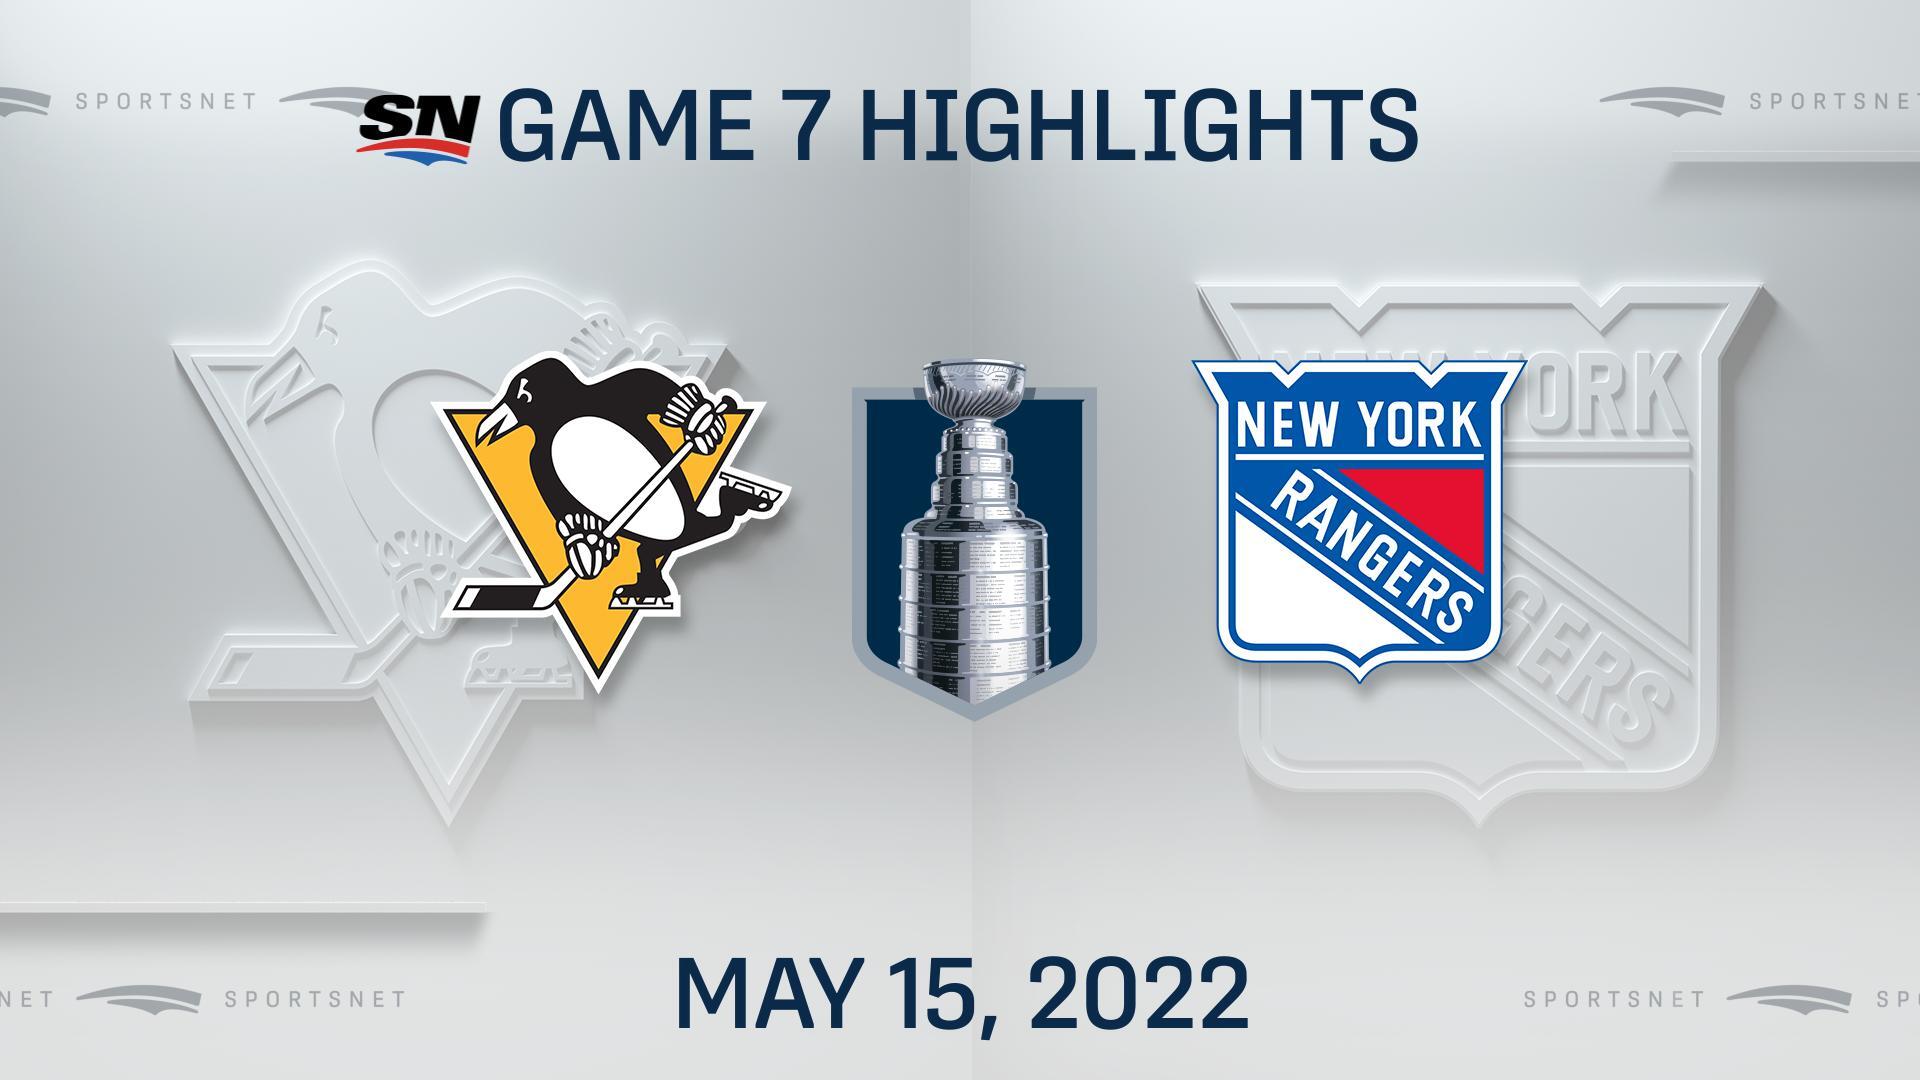 Penguins Take a 3-1 Lead in N.H.L. Playoff Series With Rangers